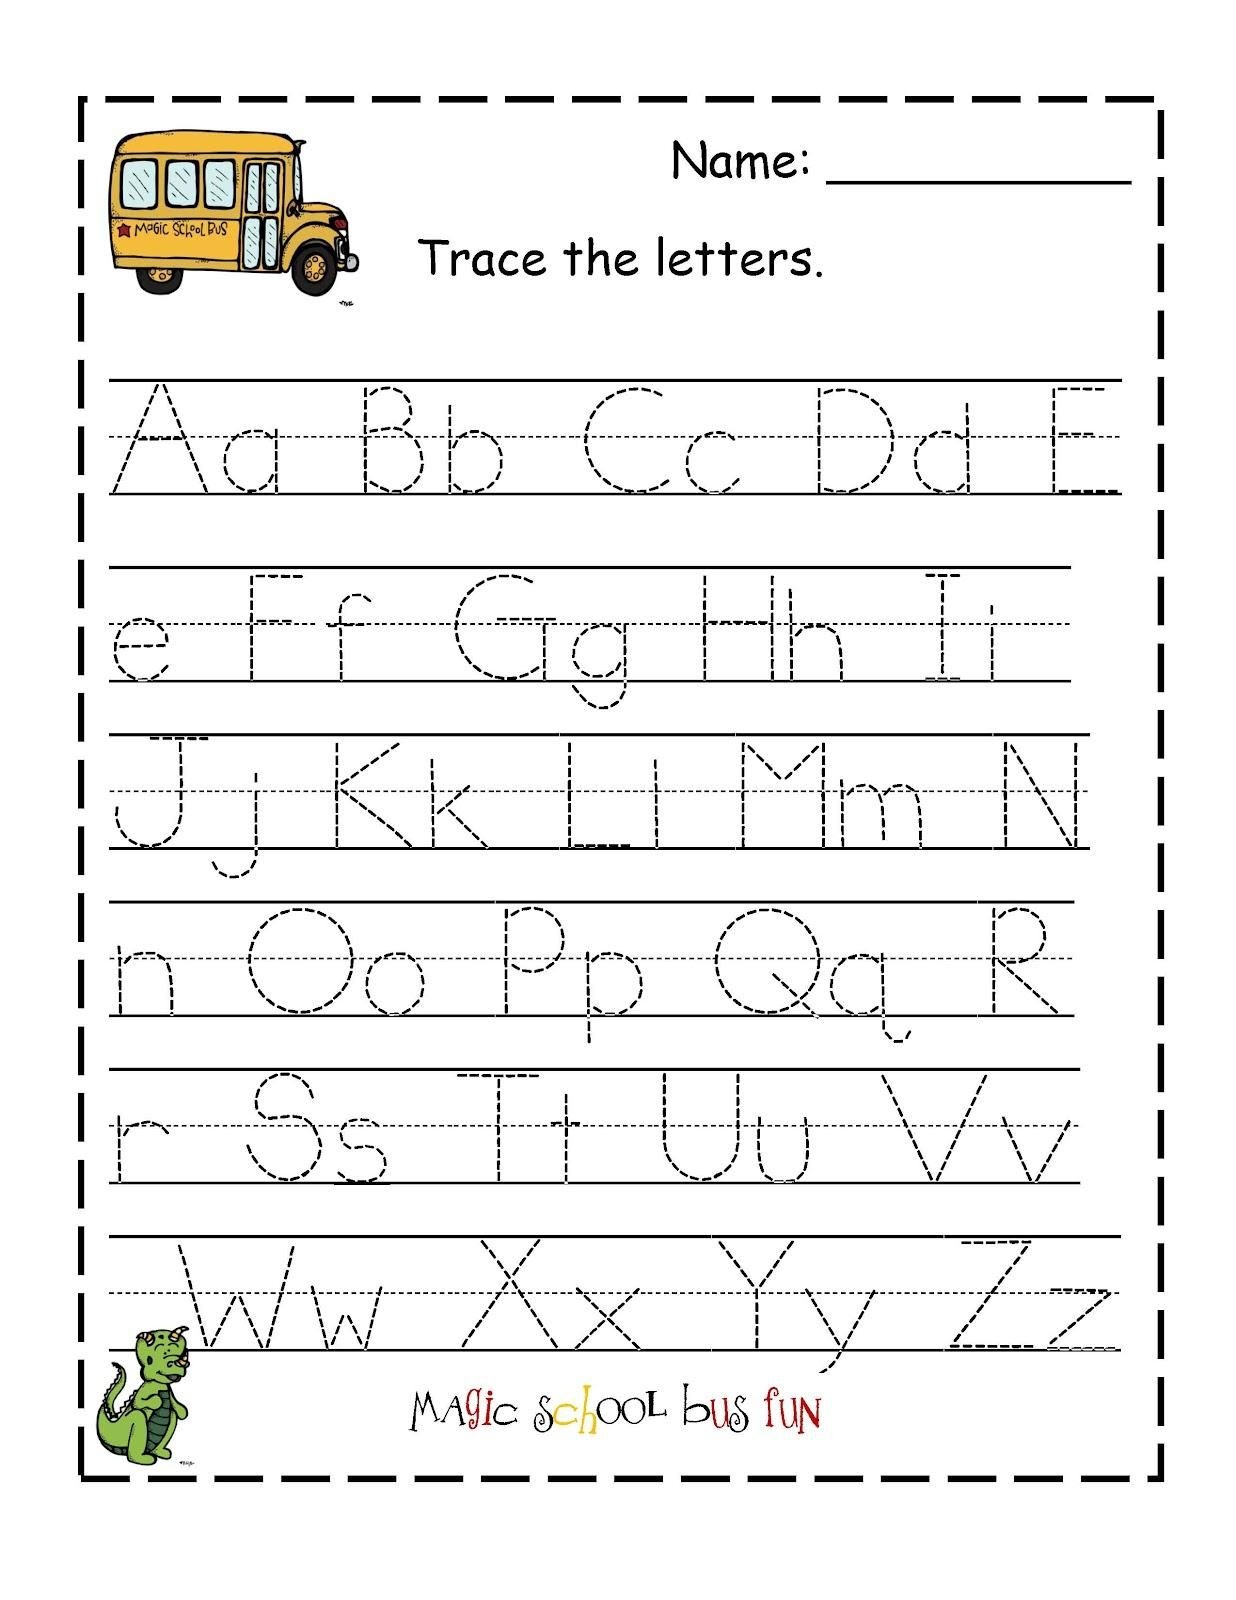 Free Printable Abc Tracing Worksheets #2 | Places To Visit - Free Printable Tracing Letters